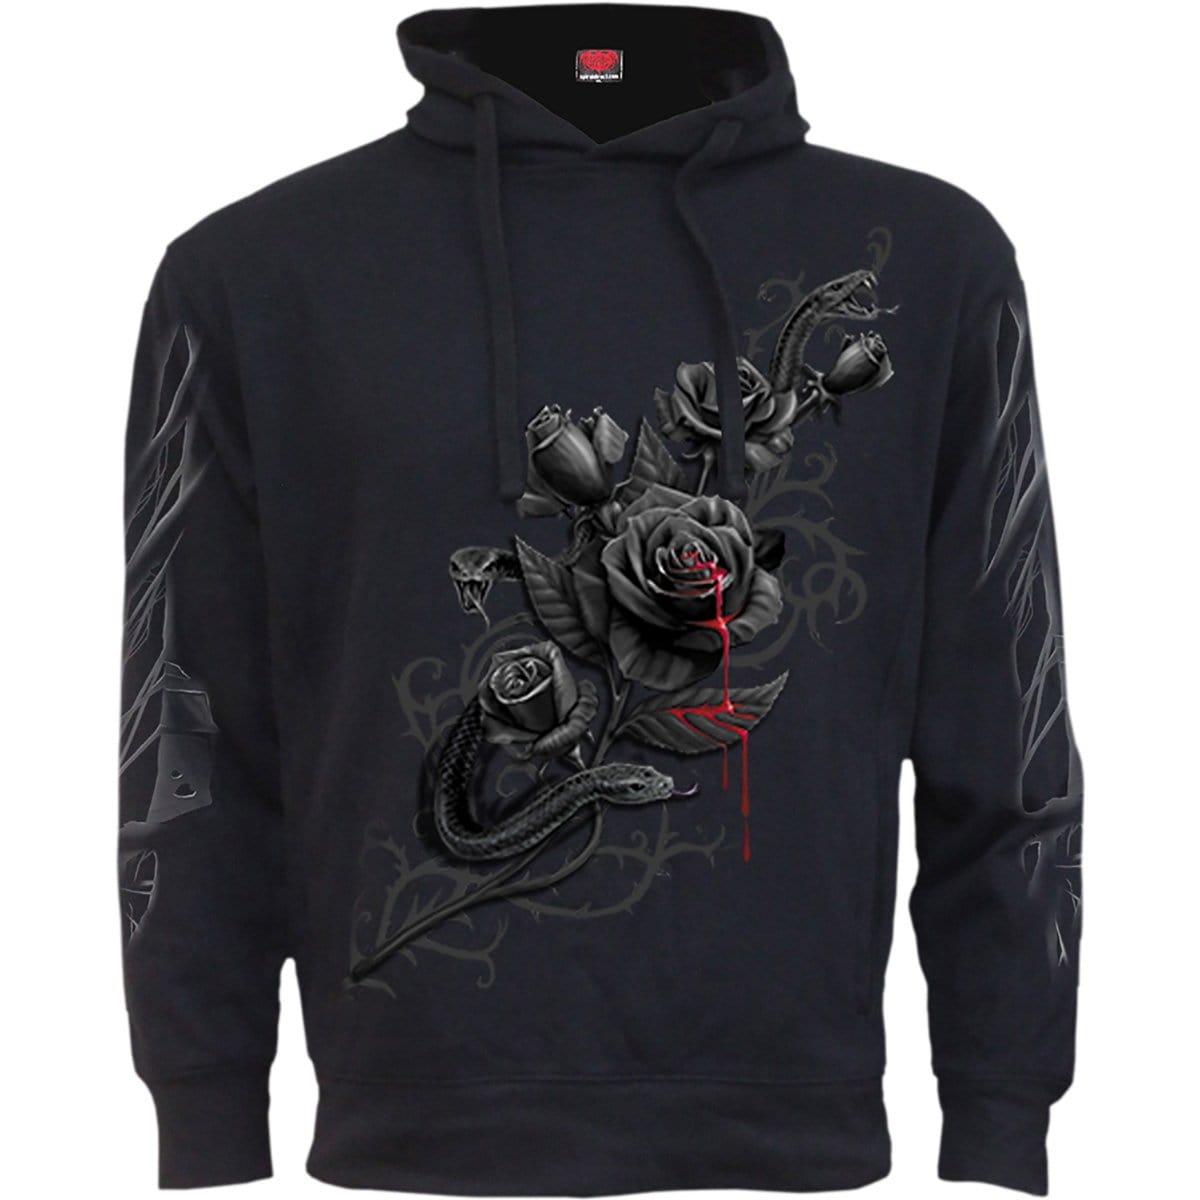 FATAL ATTRACTION - Side Pocket Stitched Hoody Black - Spiral USA